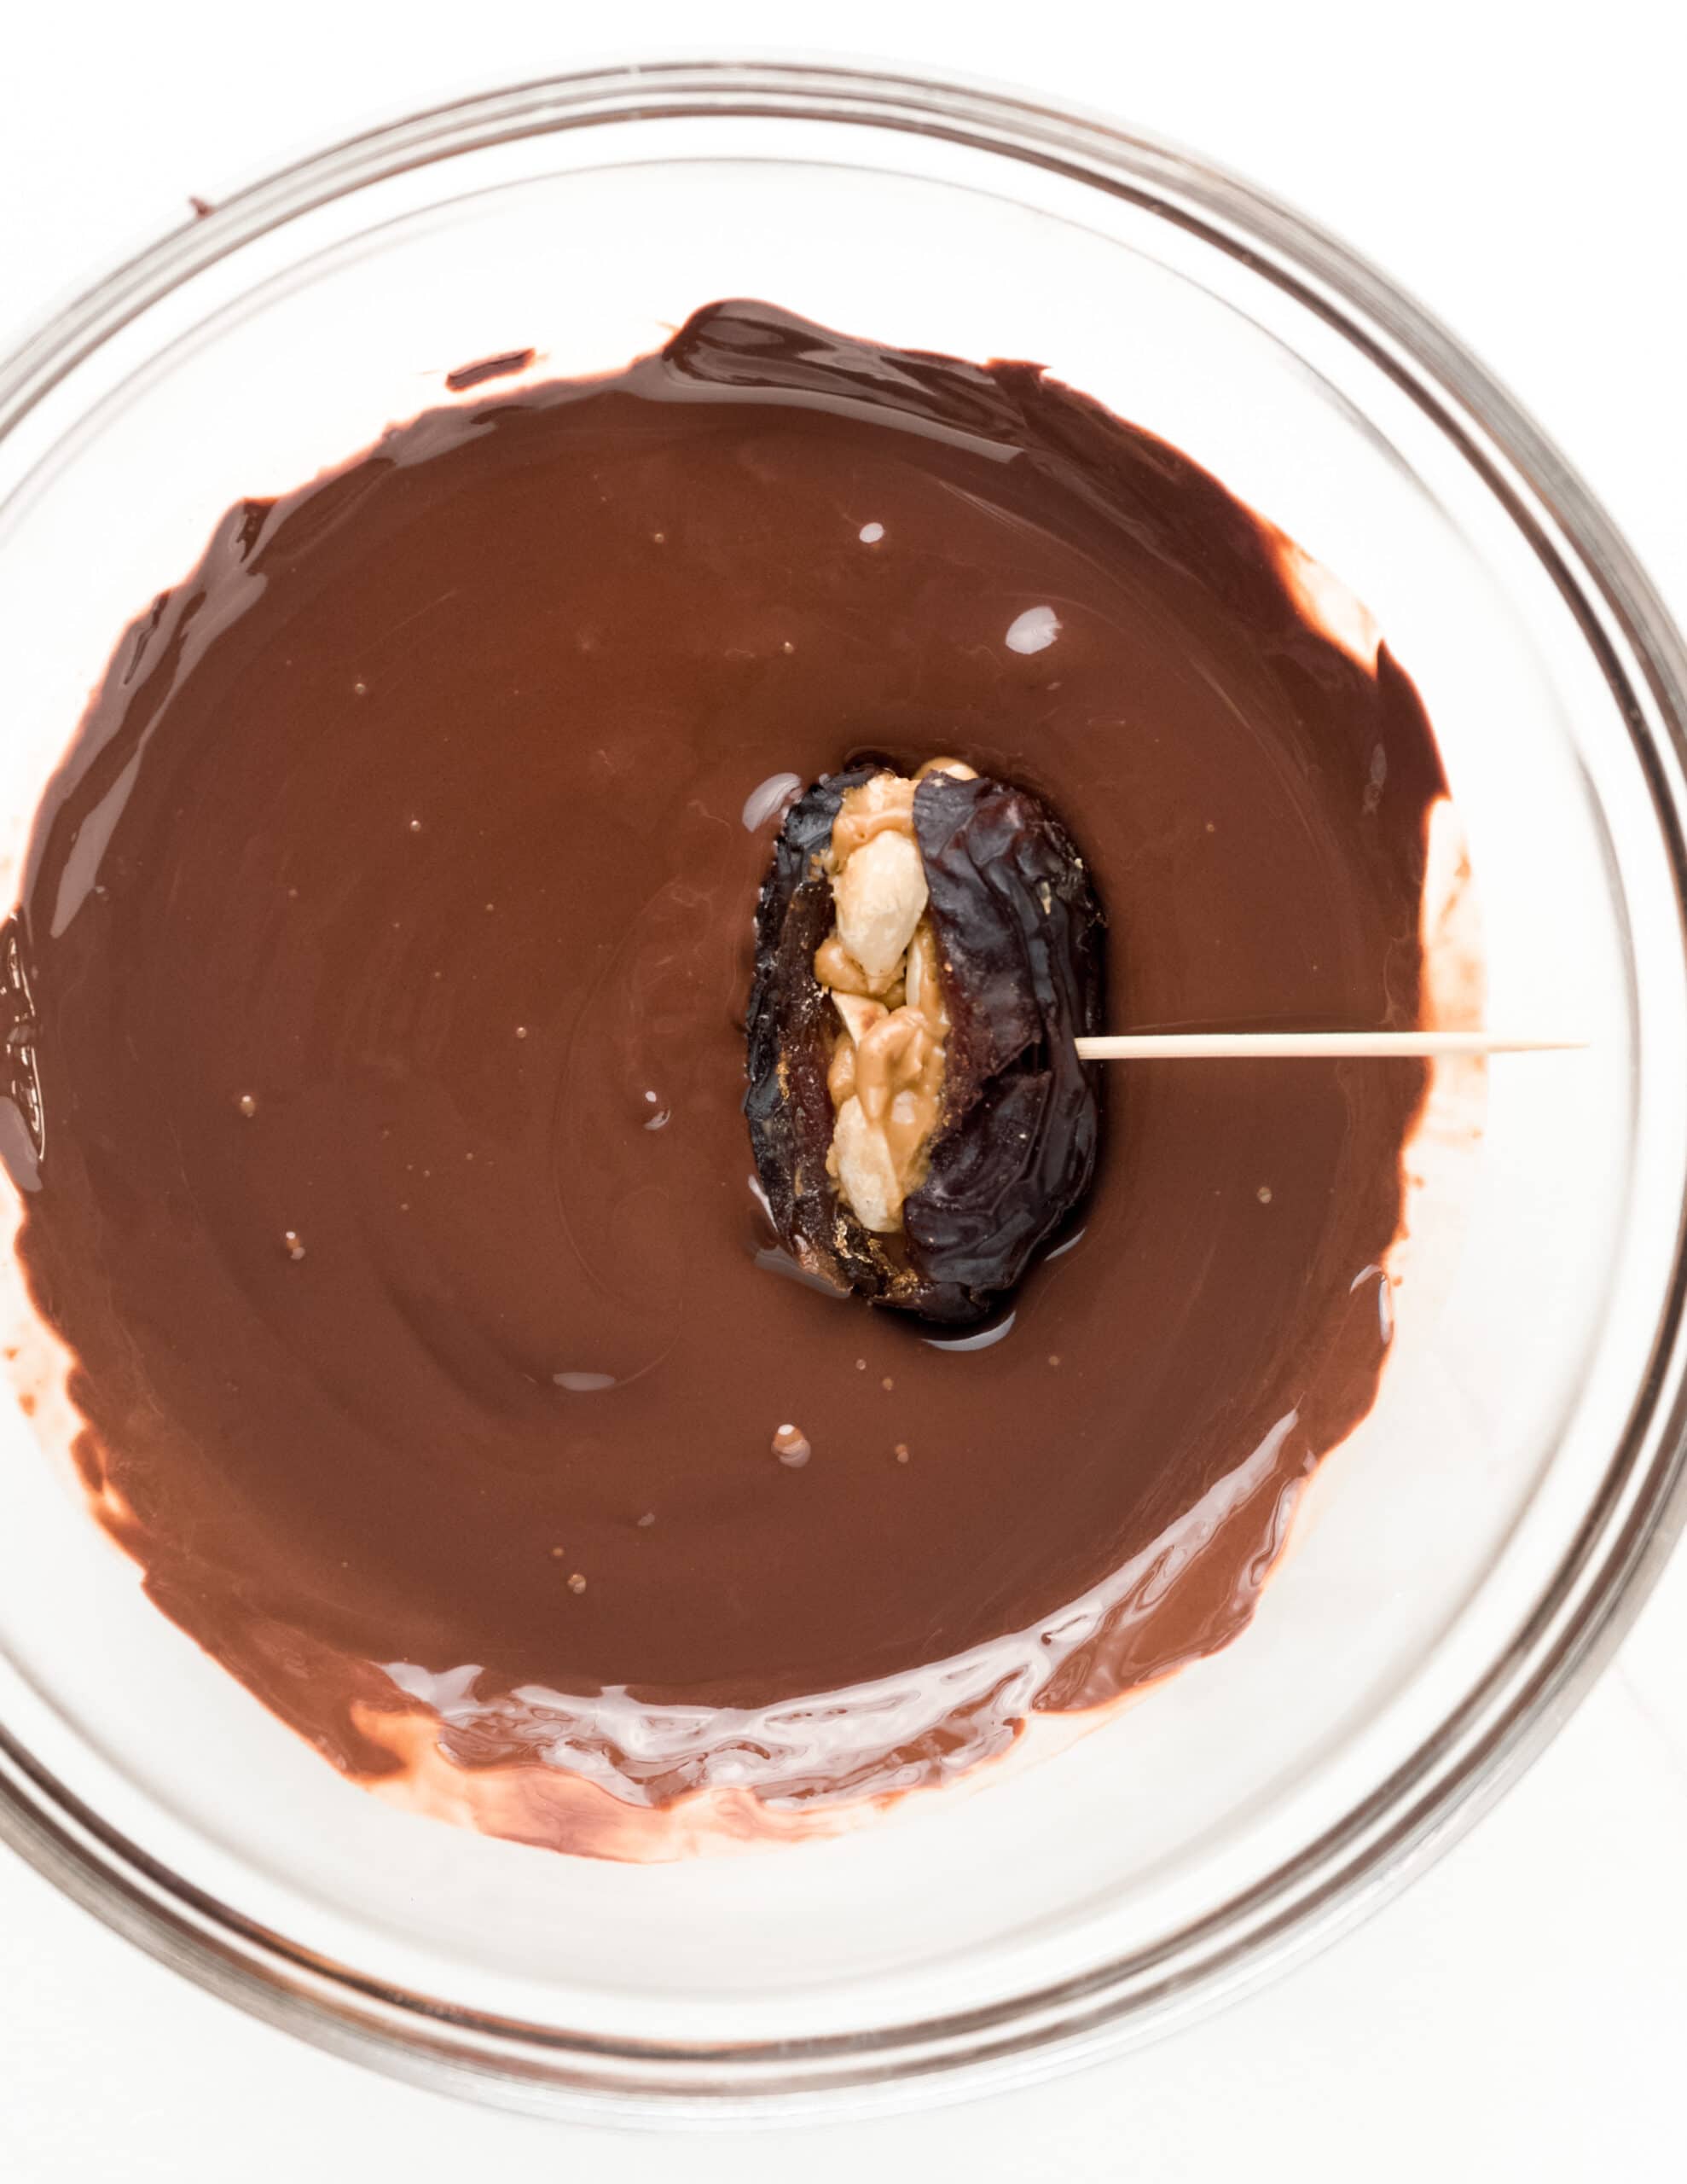 A clear bowl with melted chocolate with a peanut butter stuffed date inside being dipped in the chocolate.